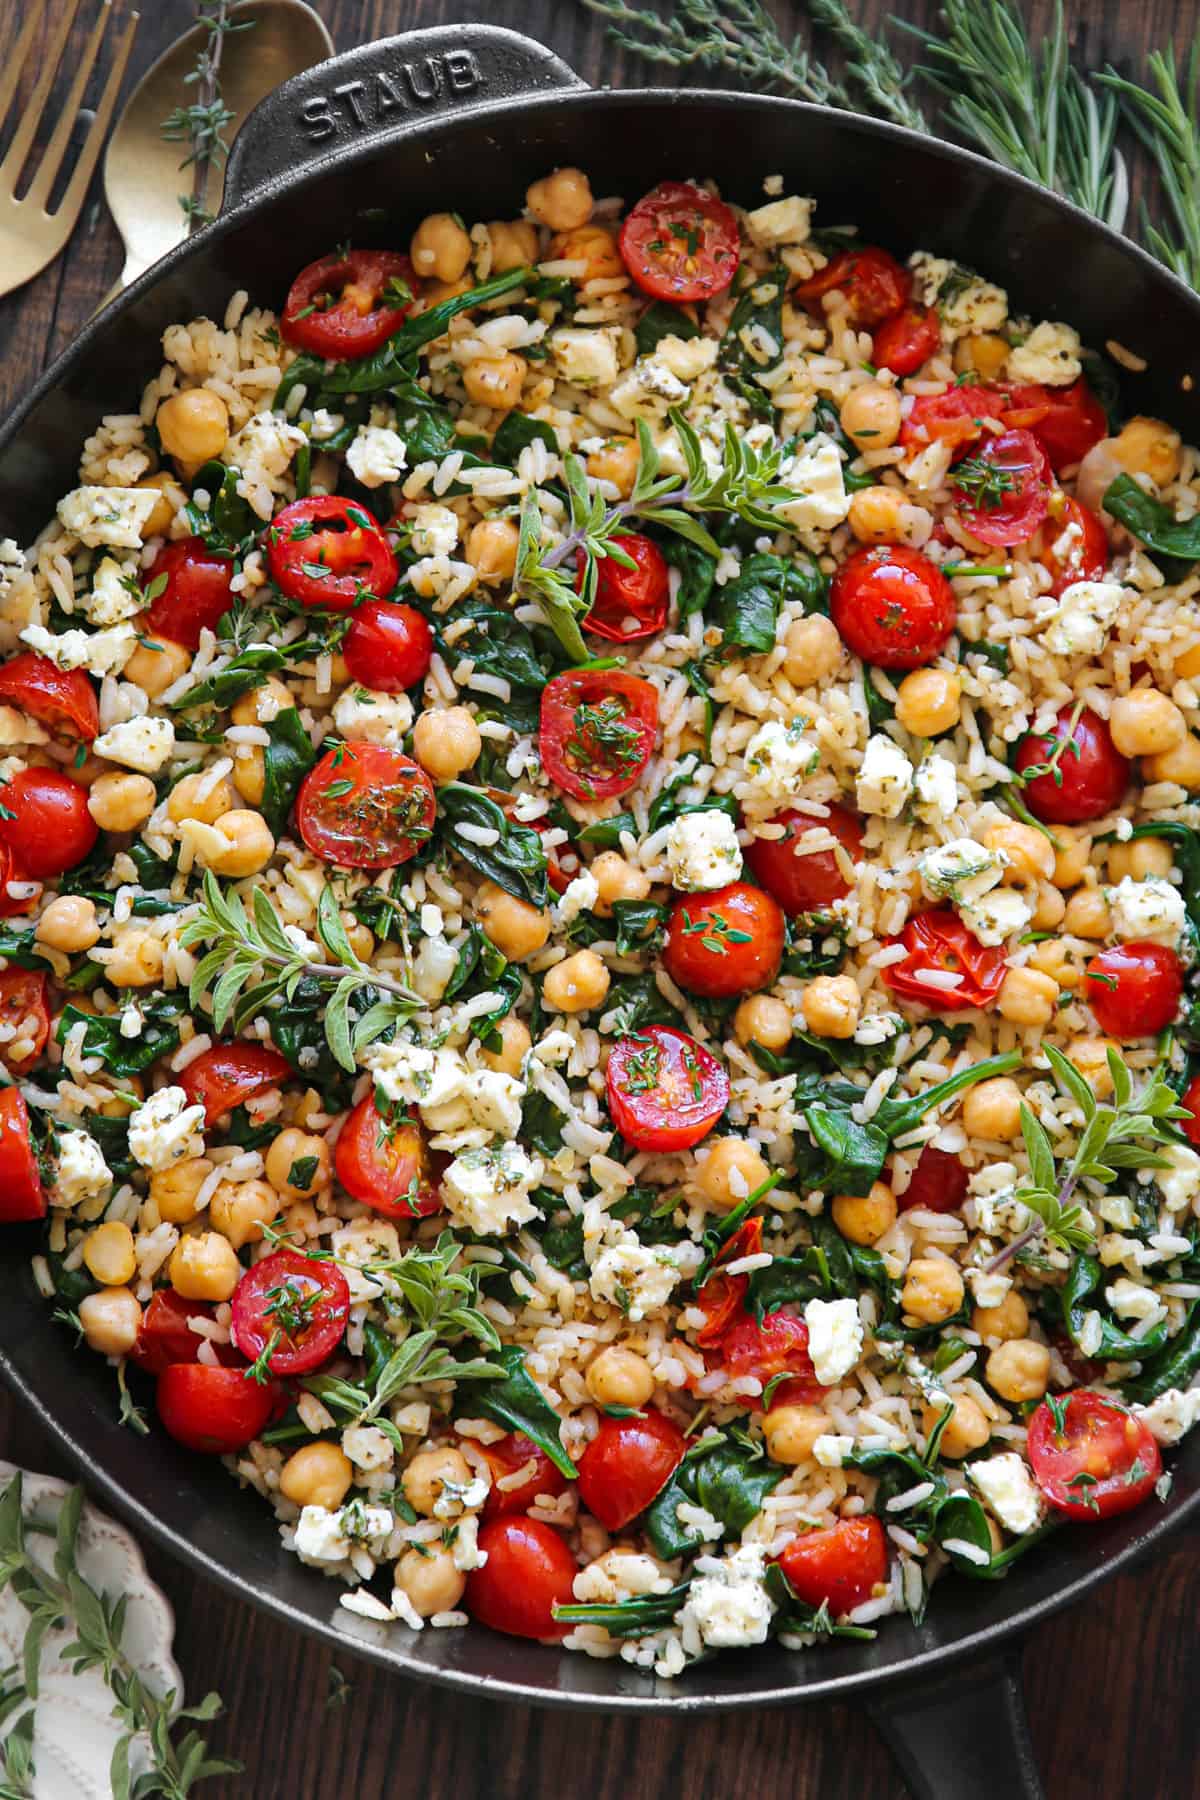 Mediterranean Lemon Rice with Chickpeas, Tomatoes, and Feta - in a cast iron skillet.